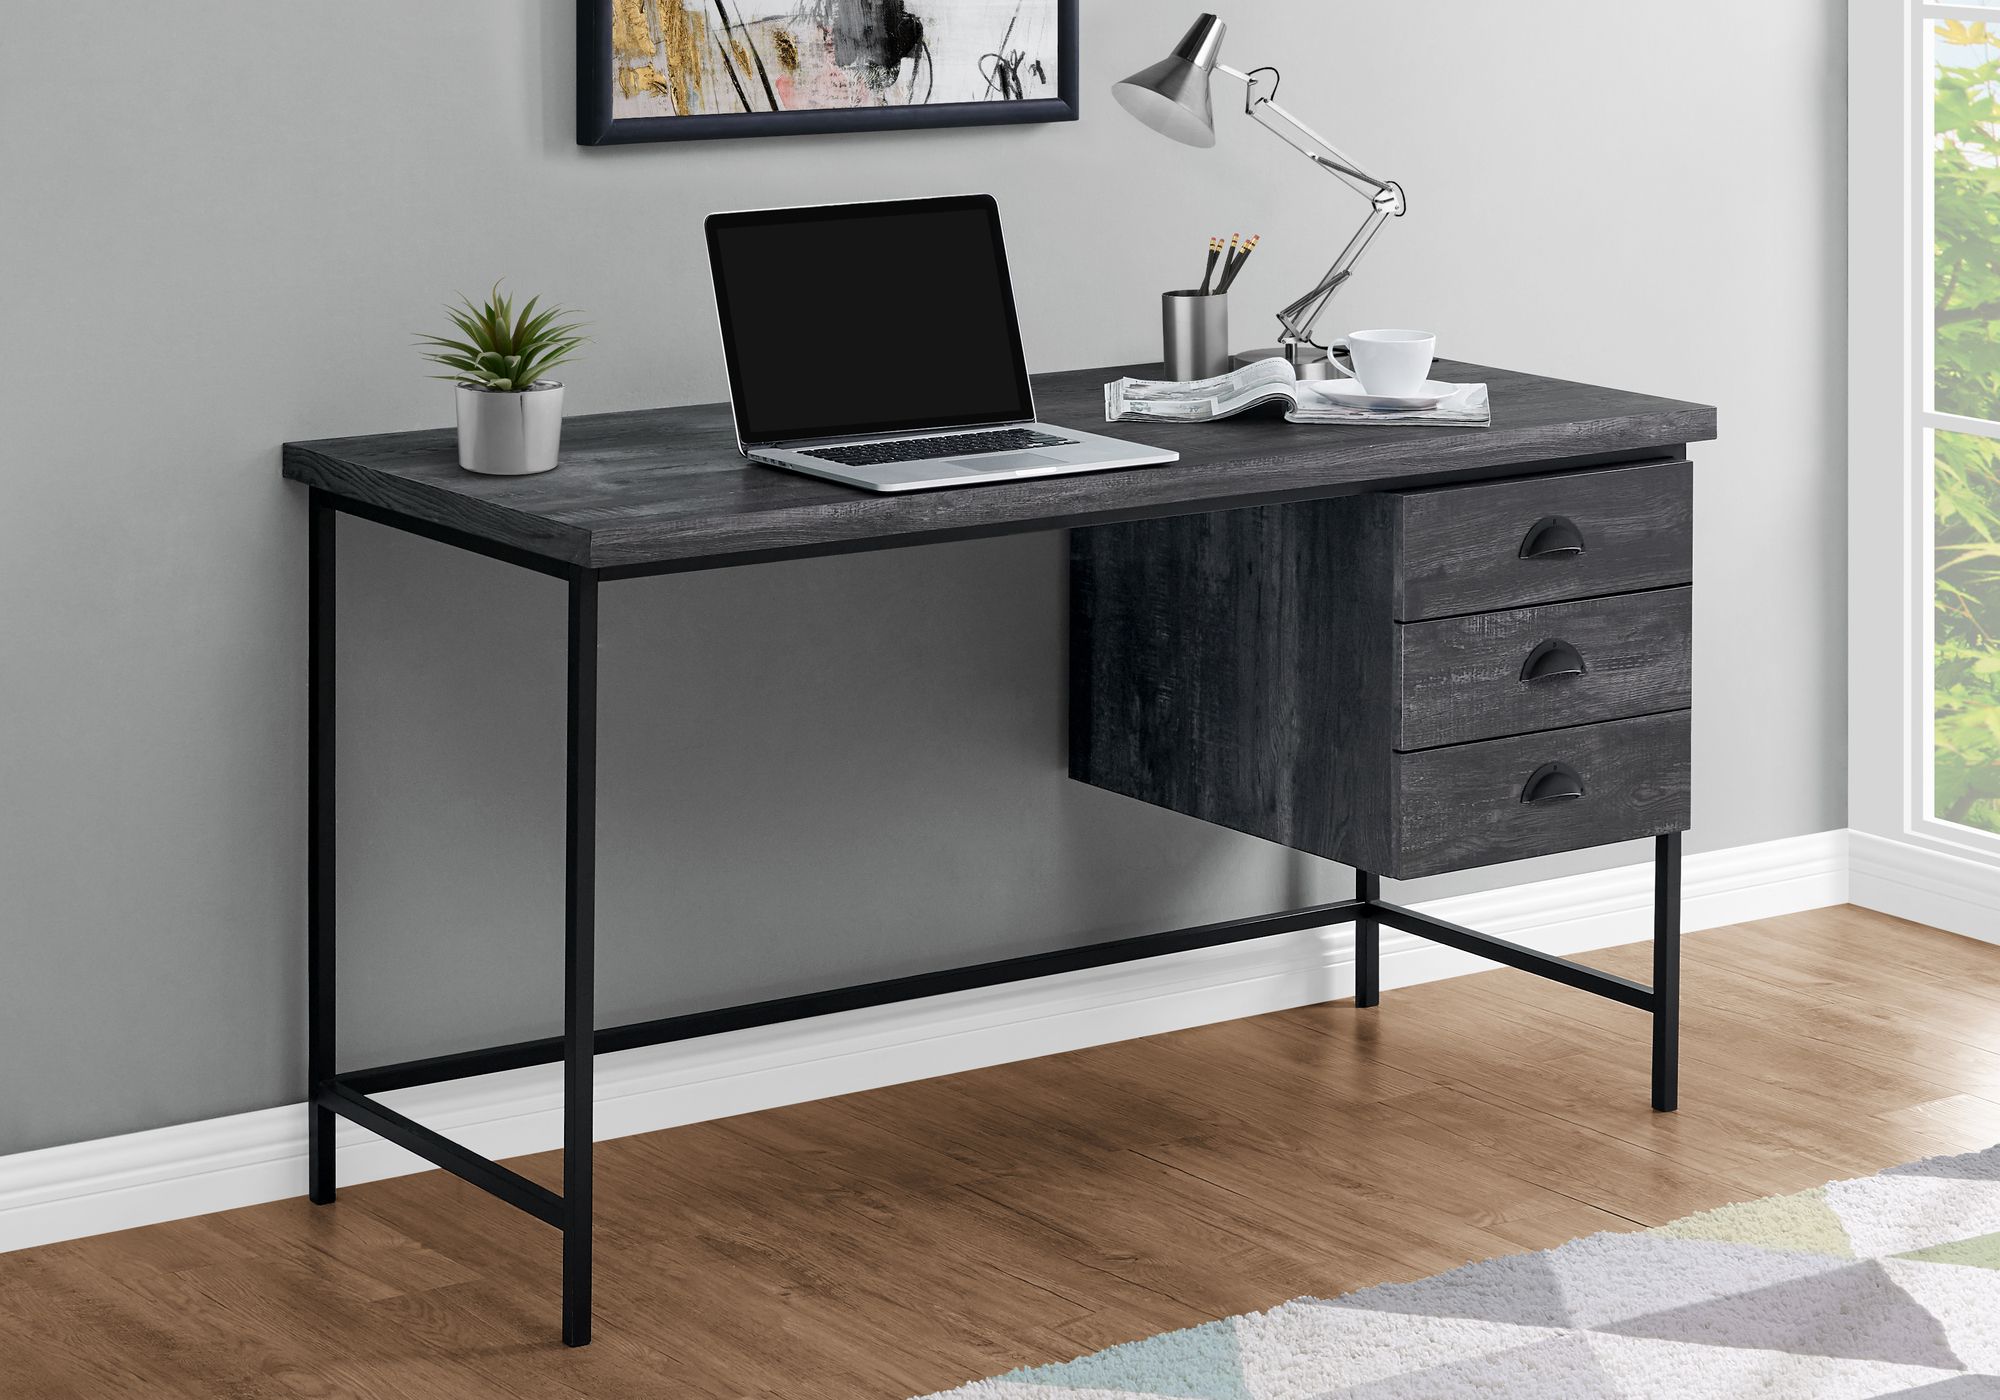 I 7488 – Computer Desk – 55"l / Black Reclaimed Wood / Black Metal Throughout Natural Wood And White Metal Office Desks (View 7 of 15)